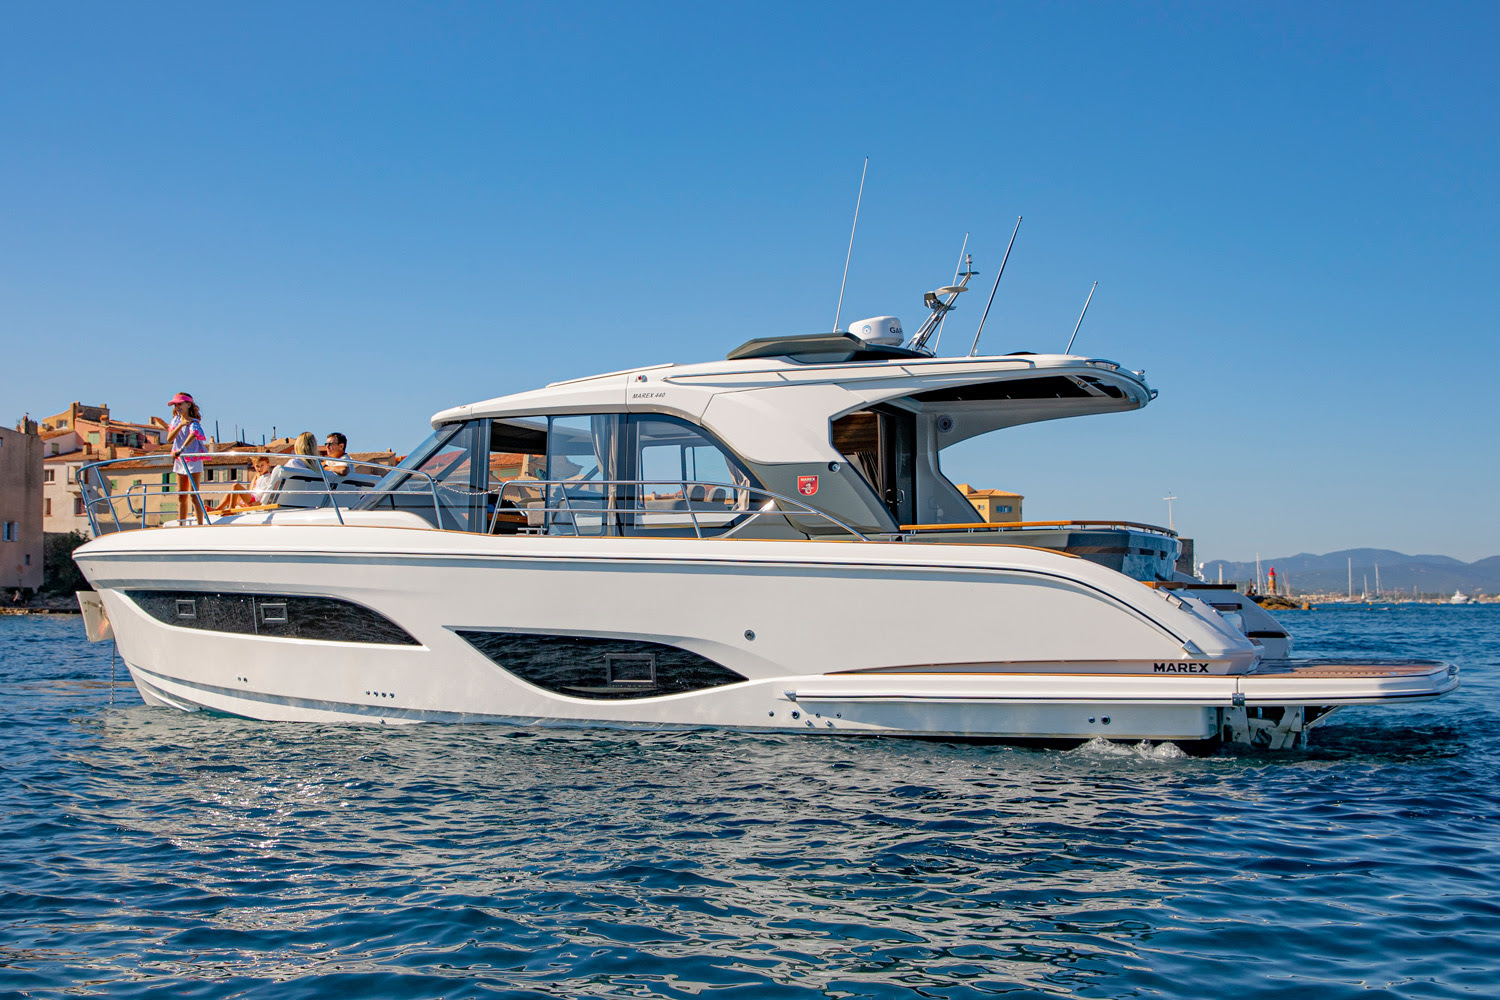 The Marex 440 Gourmet CruiserFrom the Most Awarded Boat Builder